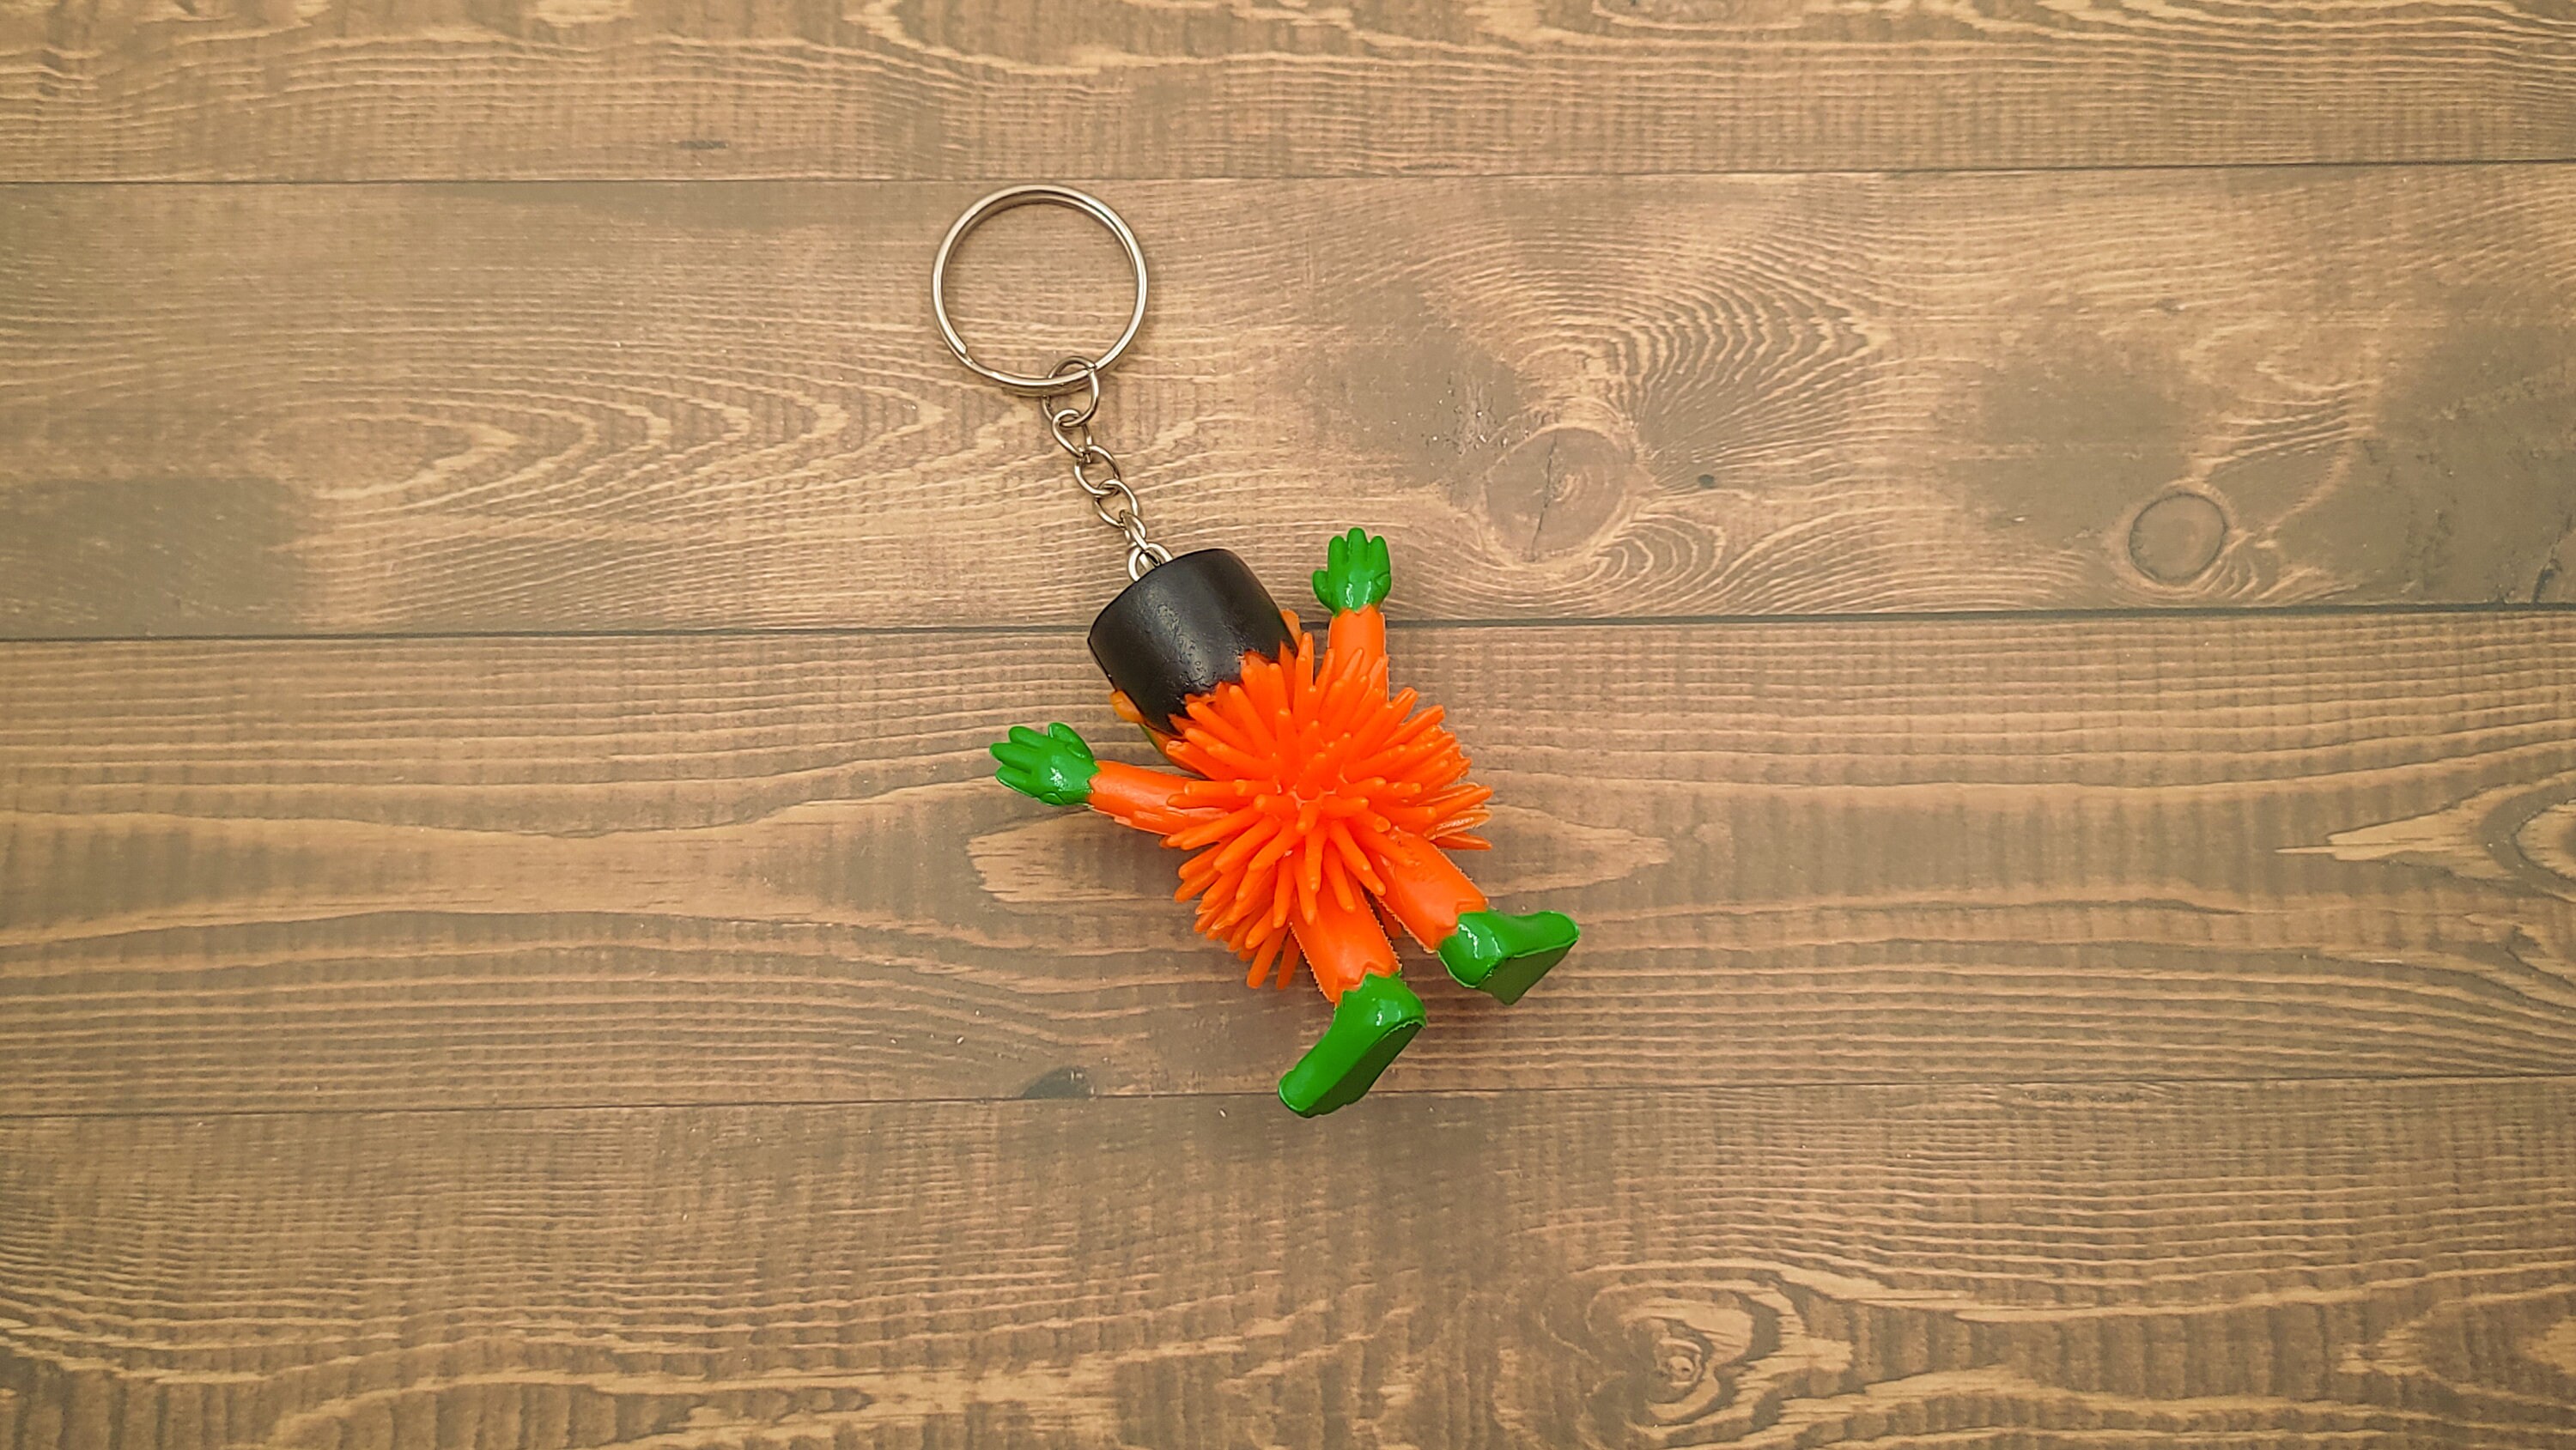 Monster Keychain, Key Accessories for Women, Goth Gifts for Her, Horror  Gifts for Him, 90s Keychain, Teenage Girl Gits, Spooky Accessories 